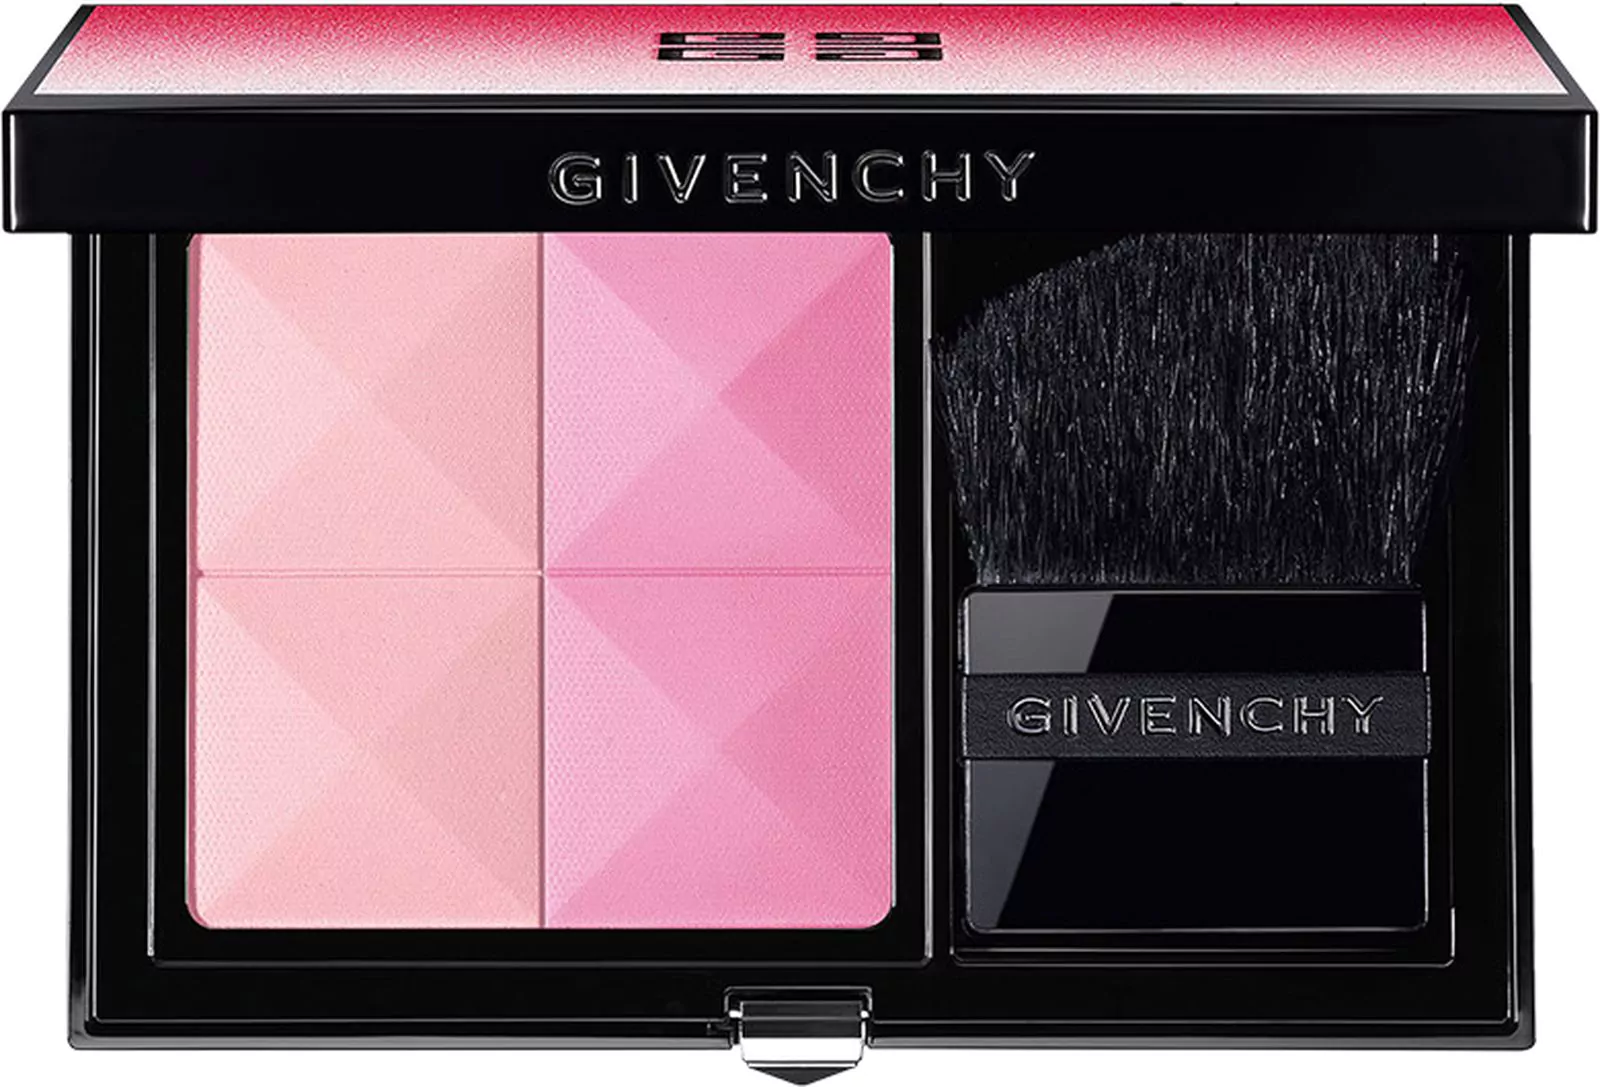 Givench Le Prisme Blush The Power Of Colo